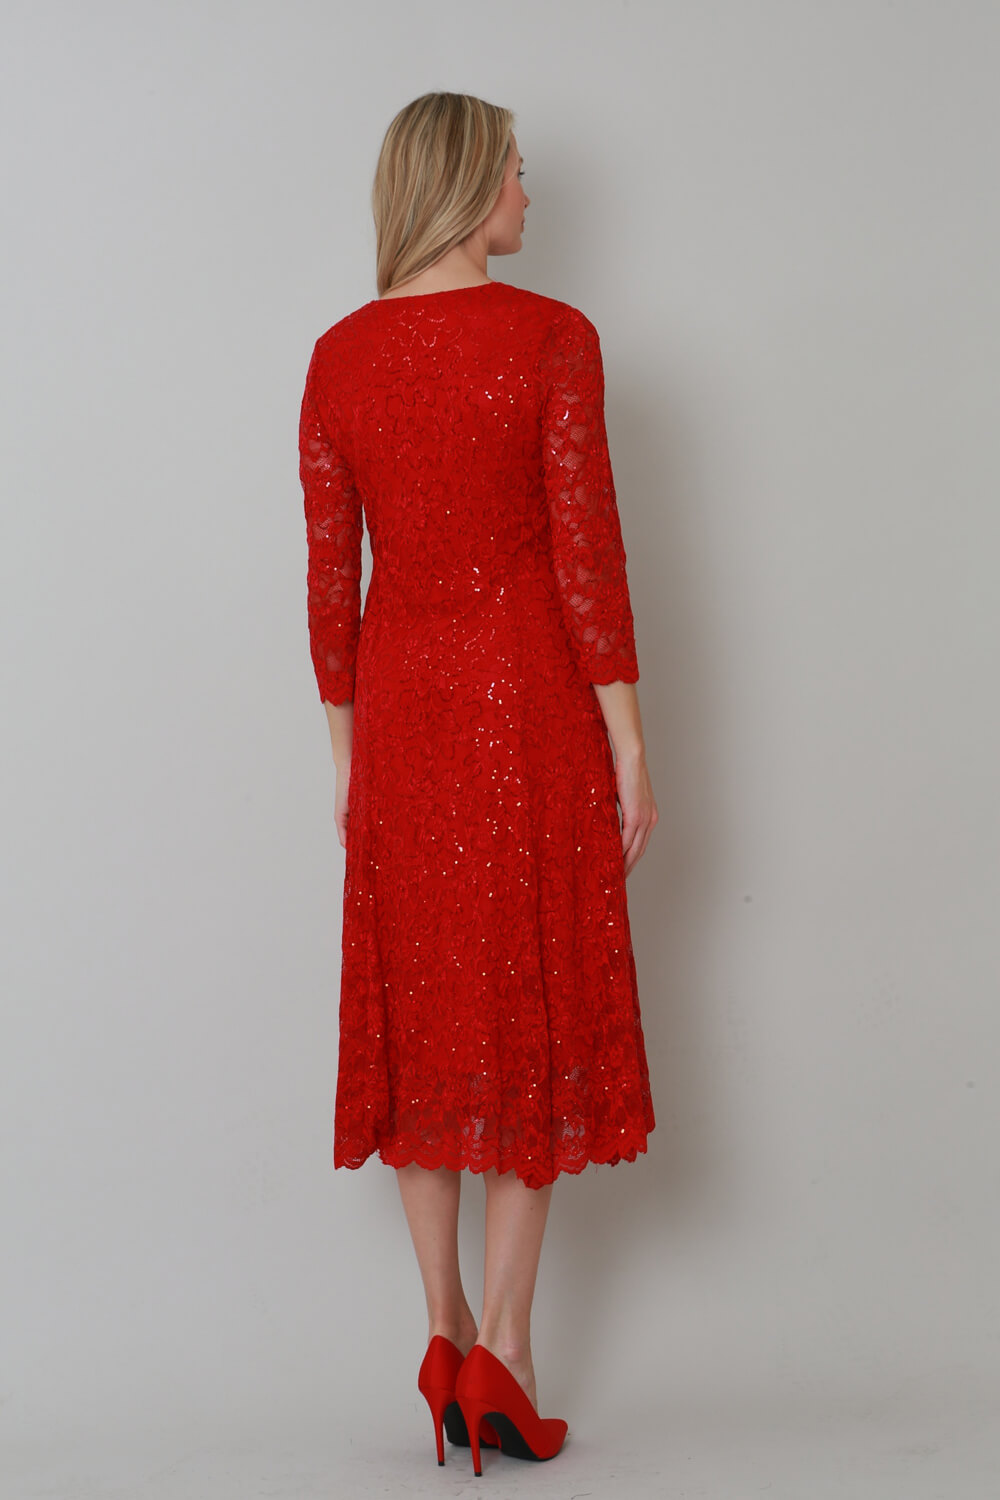 Red Julianna Sequin Lace Midi Dress, Image 2 of 4